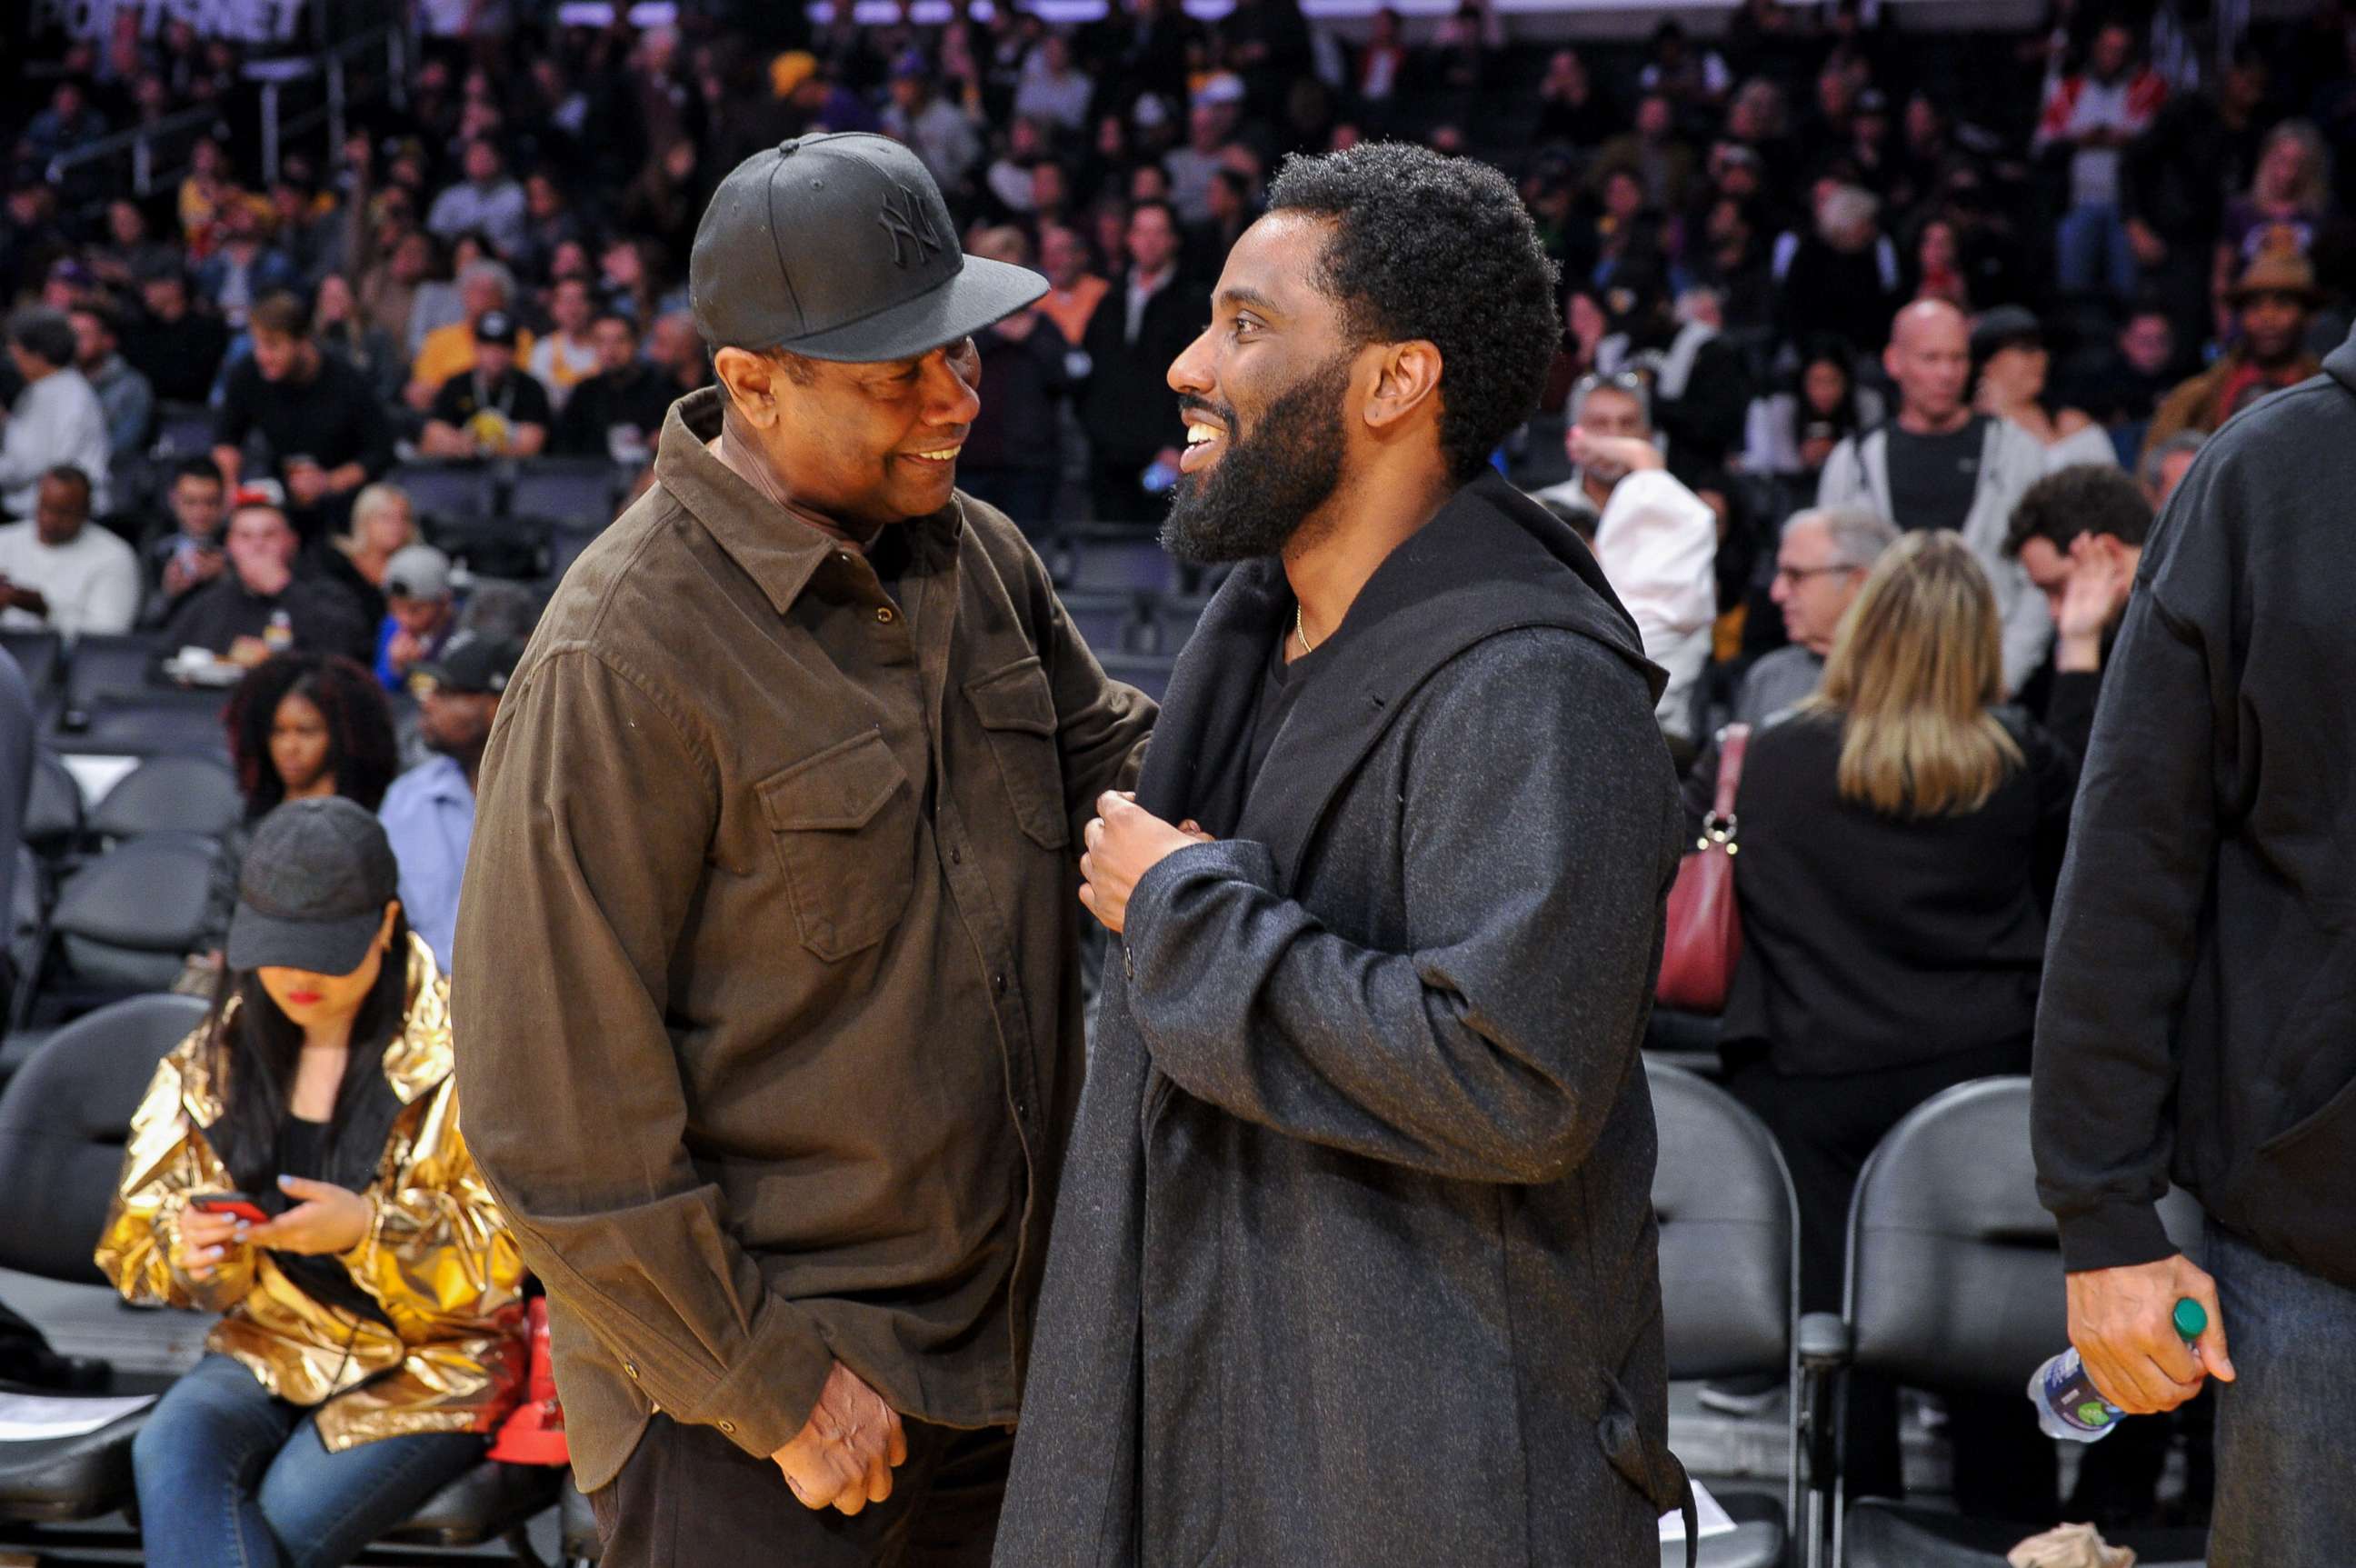 PHOTO: Actors Denzel Washington and son John David Washington attend a basketball game be at Staples Center on Dec. 5, 2018 in Los Angeles.